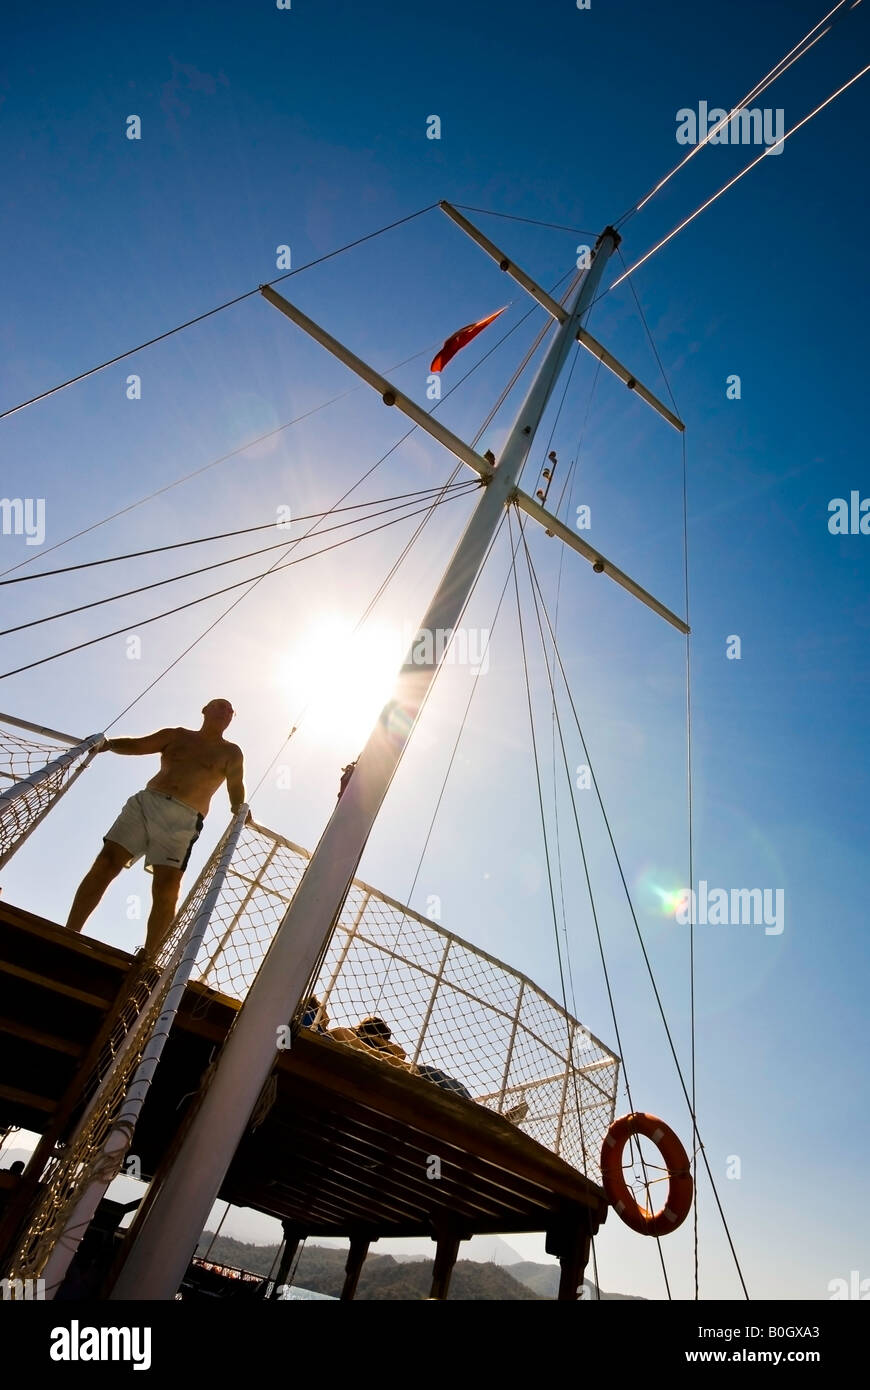 Mast of a boat and a man against a blue sky with the sun glaring through Stock Photo